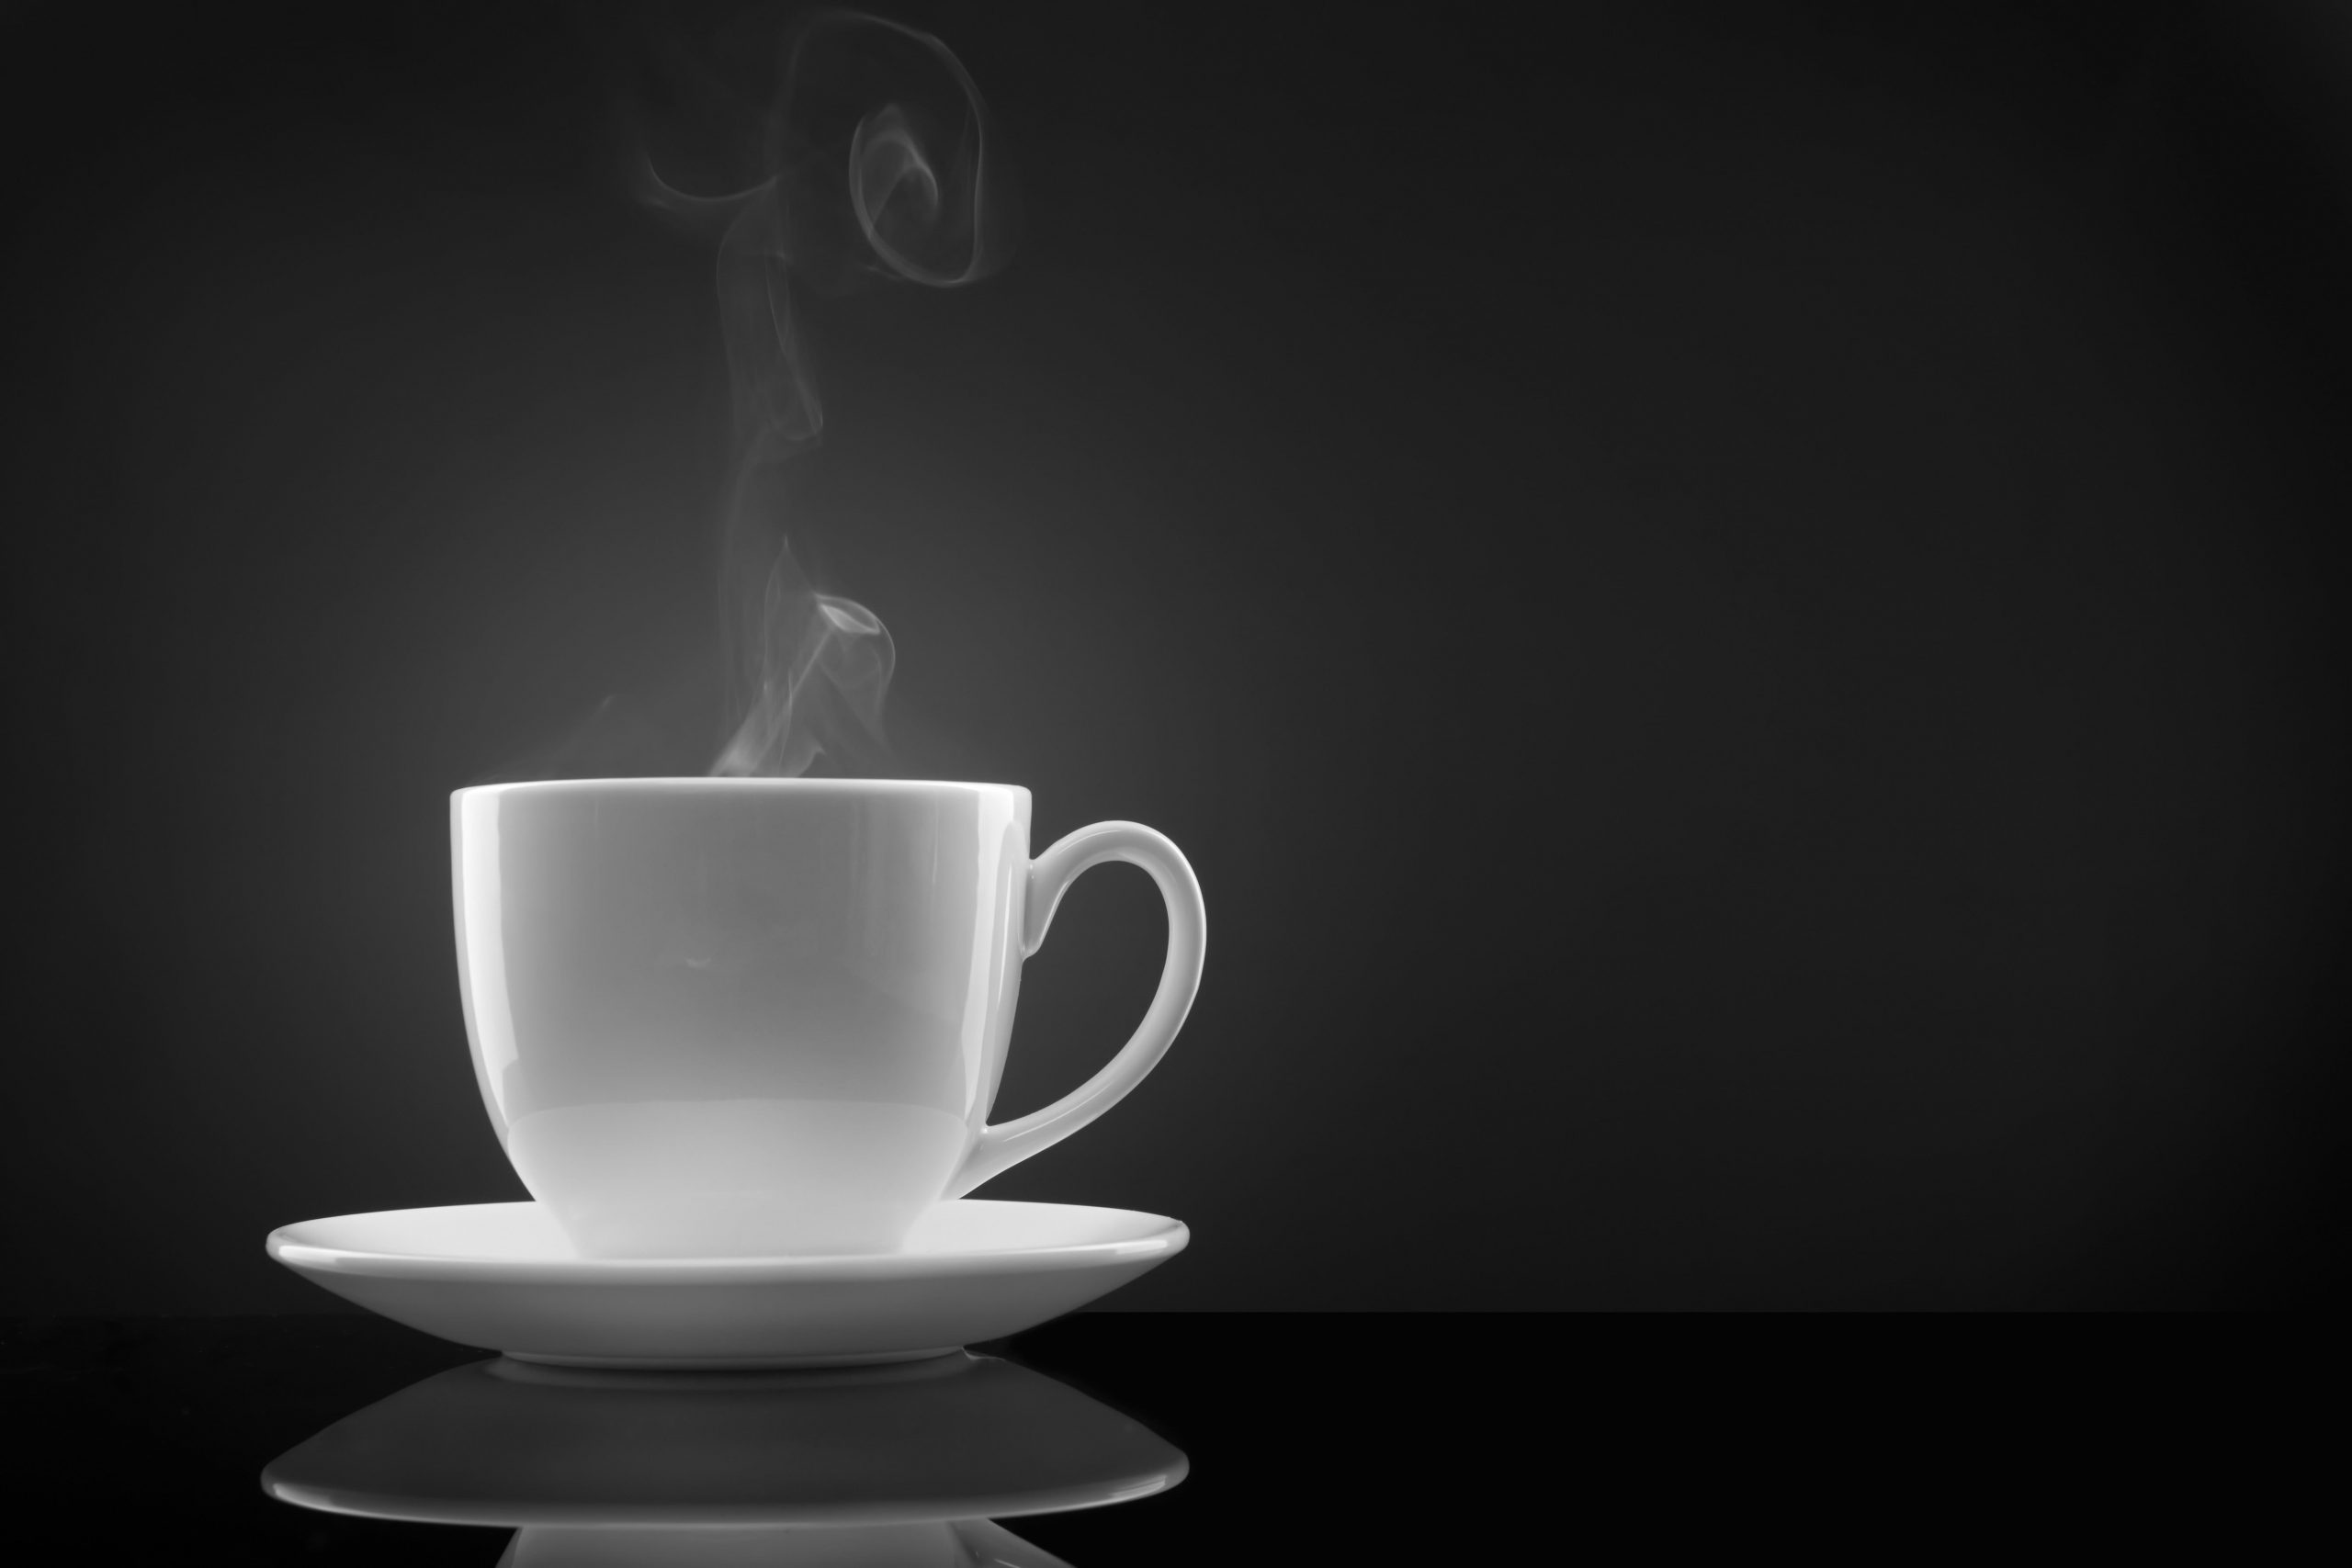 Teacup with saucer wallpaper, coffee, steam, black background